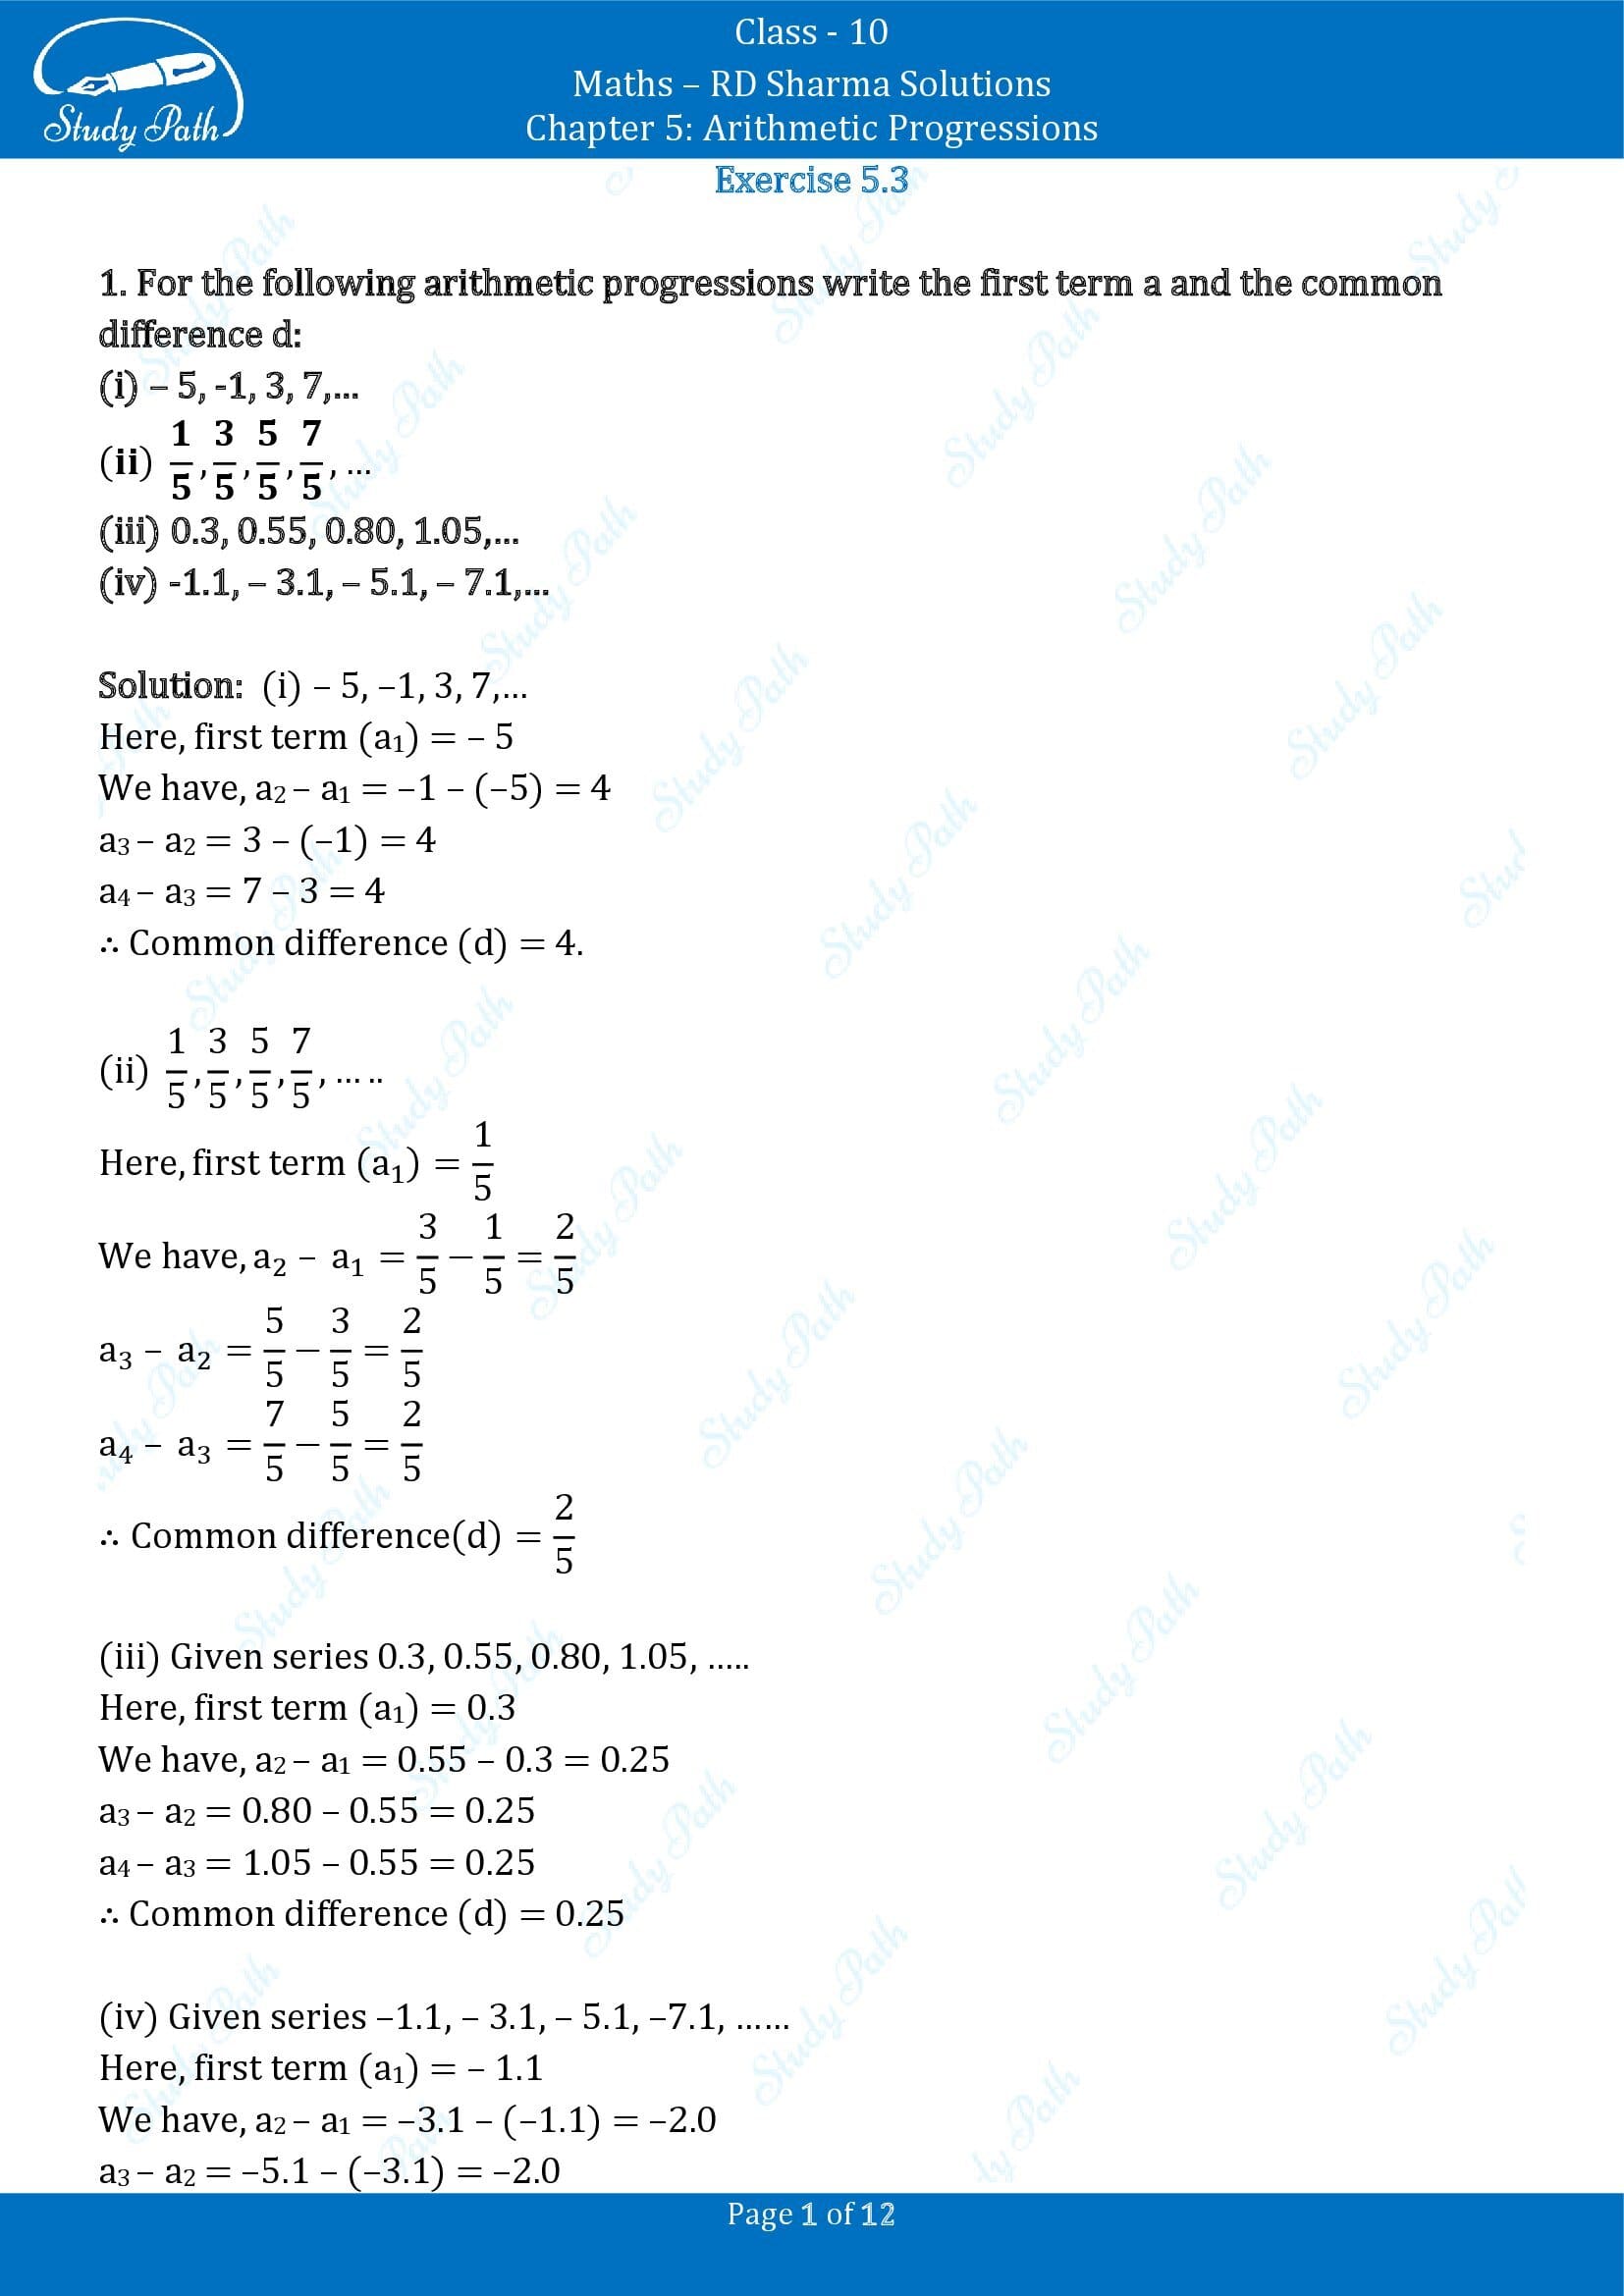 RD Sharma Solutions Class 10 Chapter 5 Arithmetic Progressions Exercise 5.3 00001